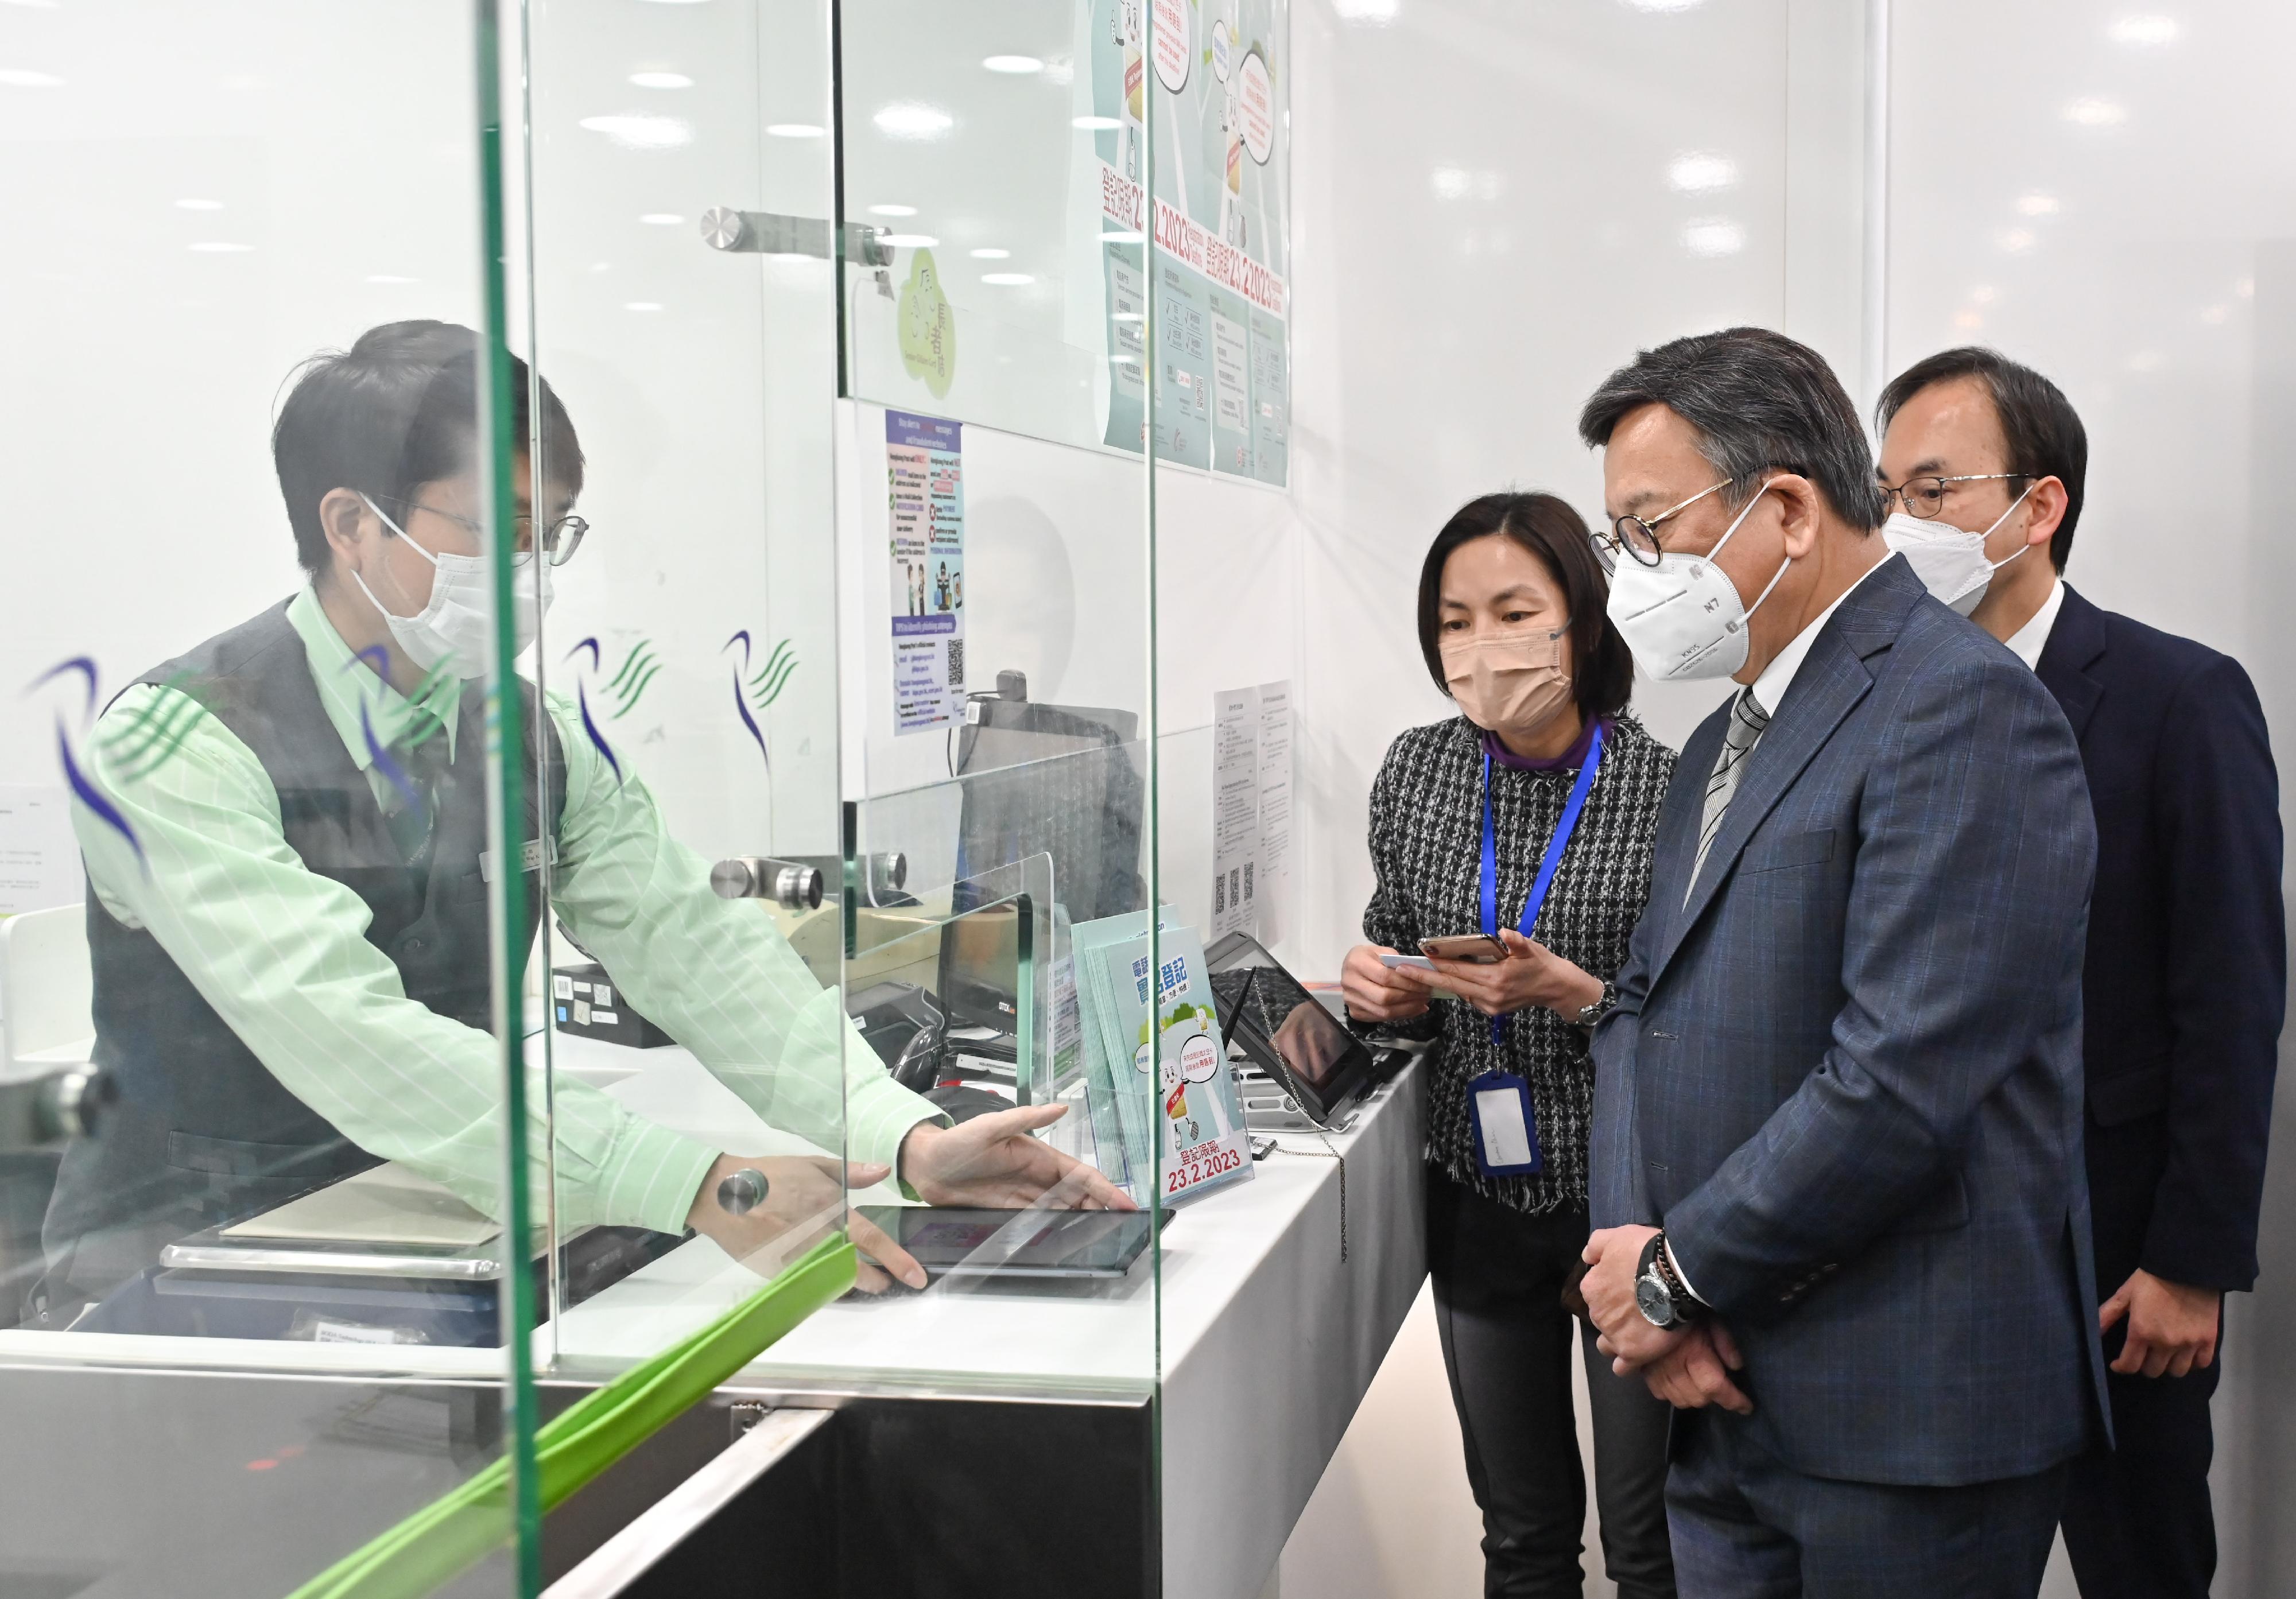 The Secretary for Commerce and Economic Development, Mr Algernon Yau, visited Wan Chai Post Office this afternoon (February 16)  to view the operation of the support service for real-name registration for SIM cards. Photo shows Mr Yau (second right), accompanied by the Director-General of Communications, Mr Chaucer Leung (first right), being briefed by a representative of the Office of the Communications Authority on the support service.